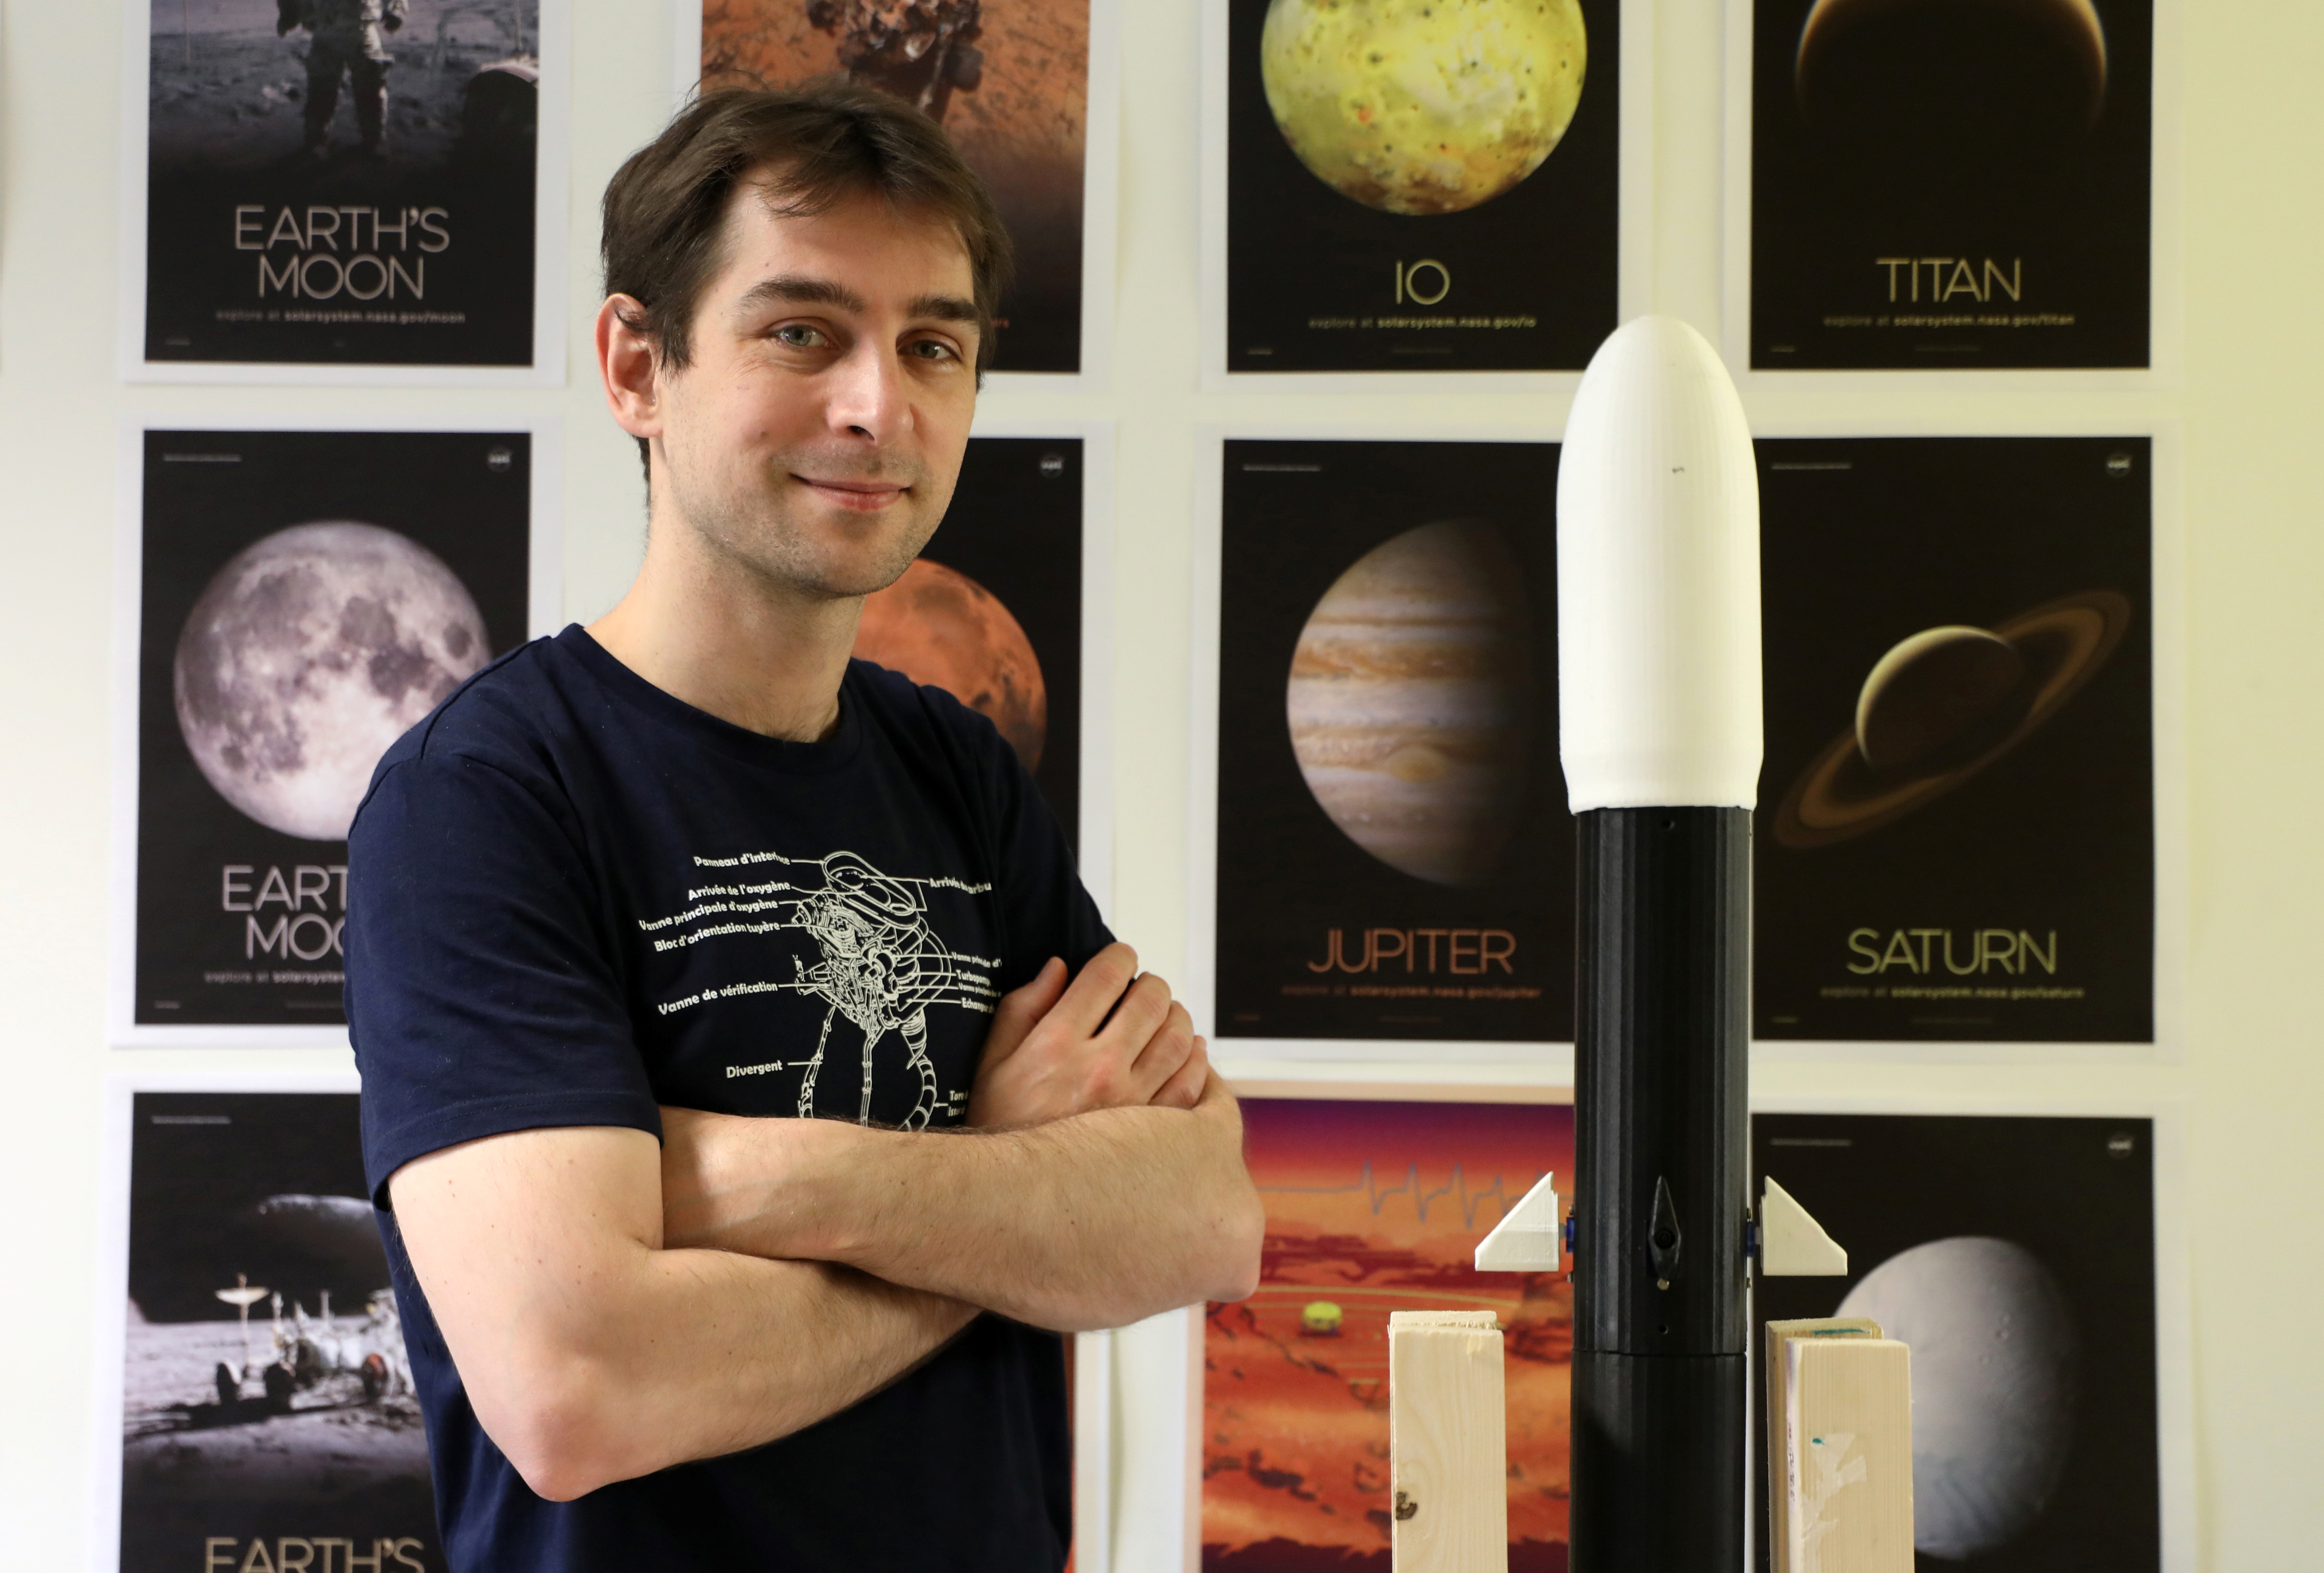 Matthieu Pluvinage, a candidate to the European Space Agency (ESA) astronaut selection, poses in his office at the ESIGELEC engineering school where he teaches, in Saint-Etienne-du-Rouvray, France, June 4, 2021. Picture taken June 4, 2021. REUTERS/Lea Guedj